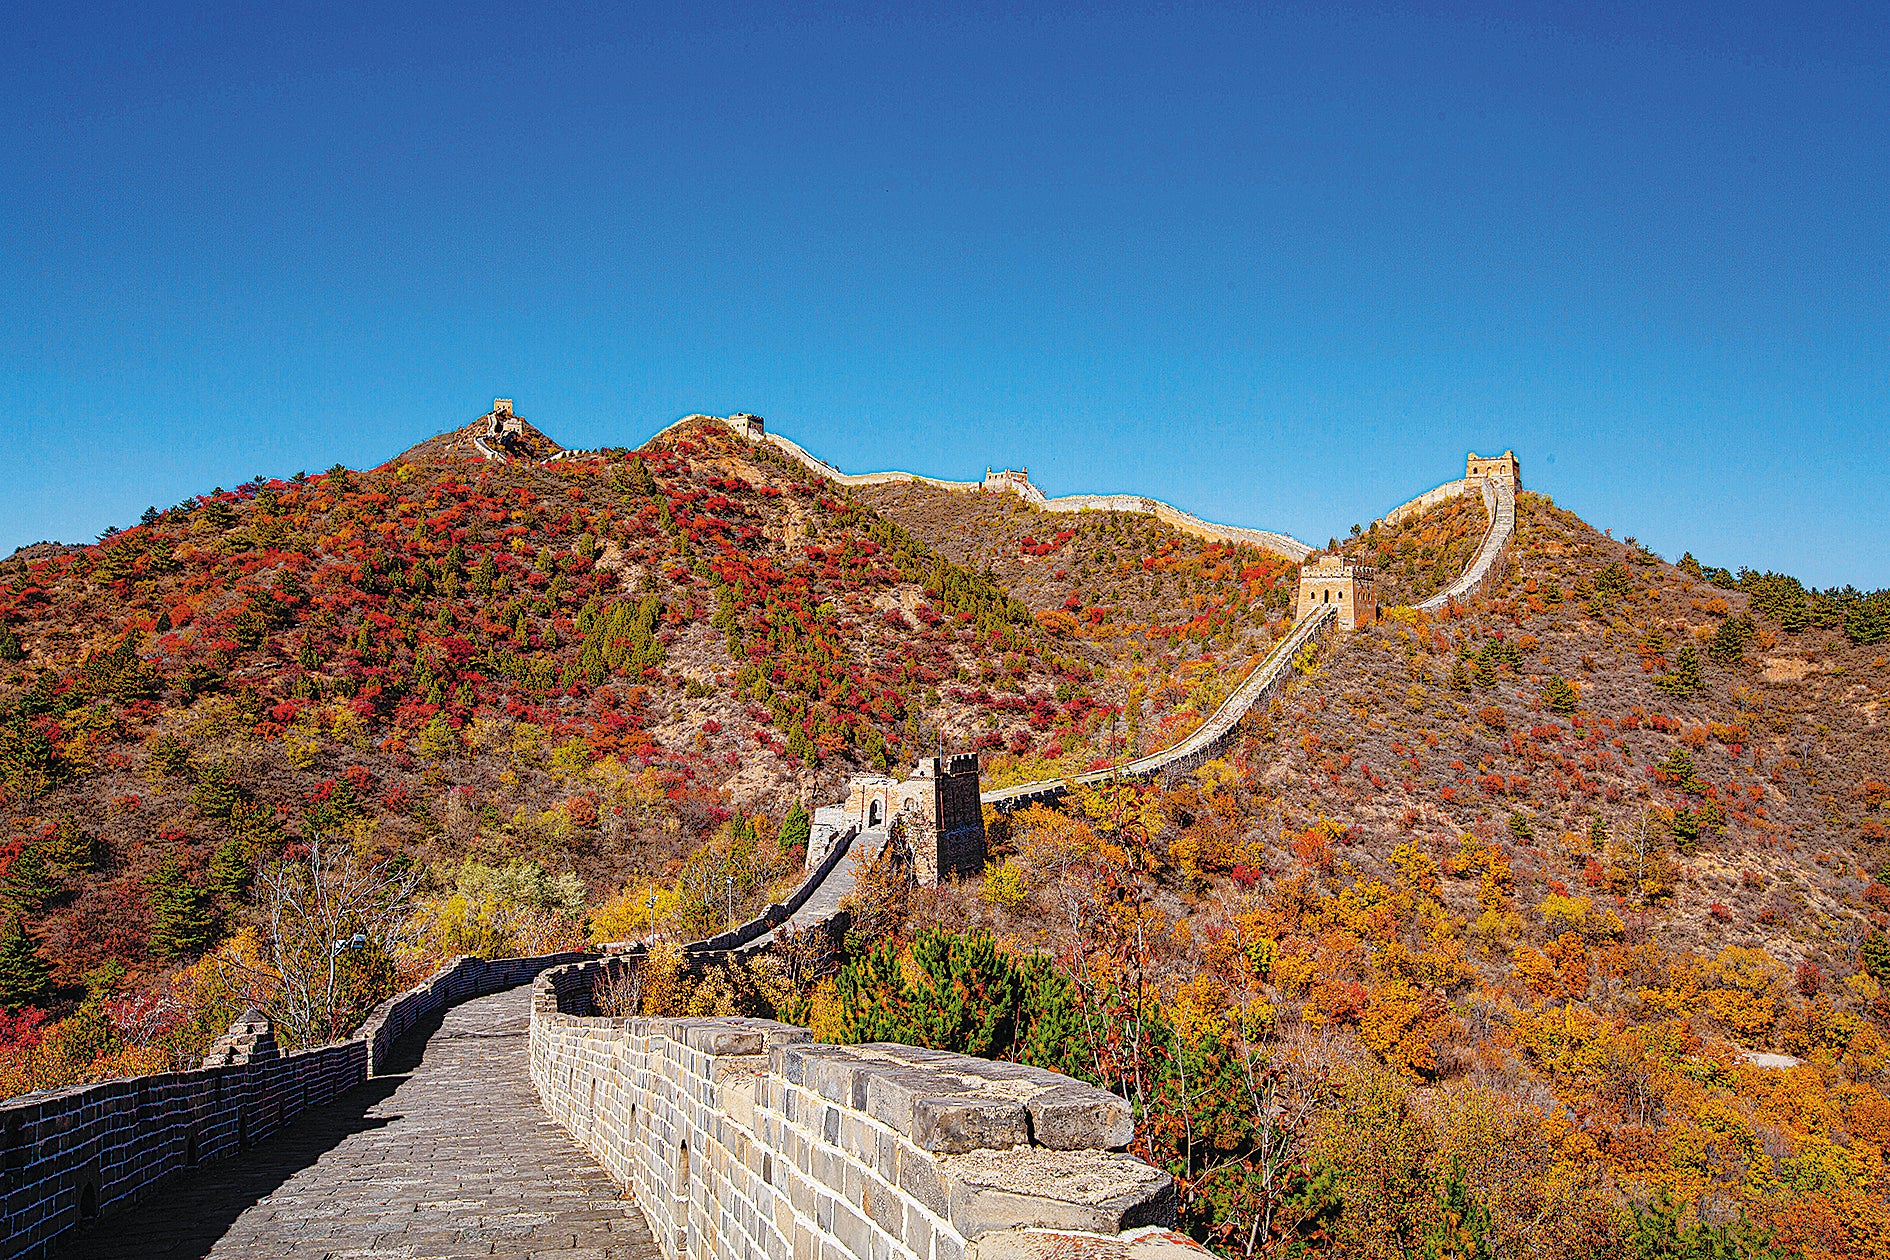 The Simatai section of the Great Wall in Beijing